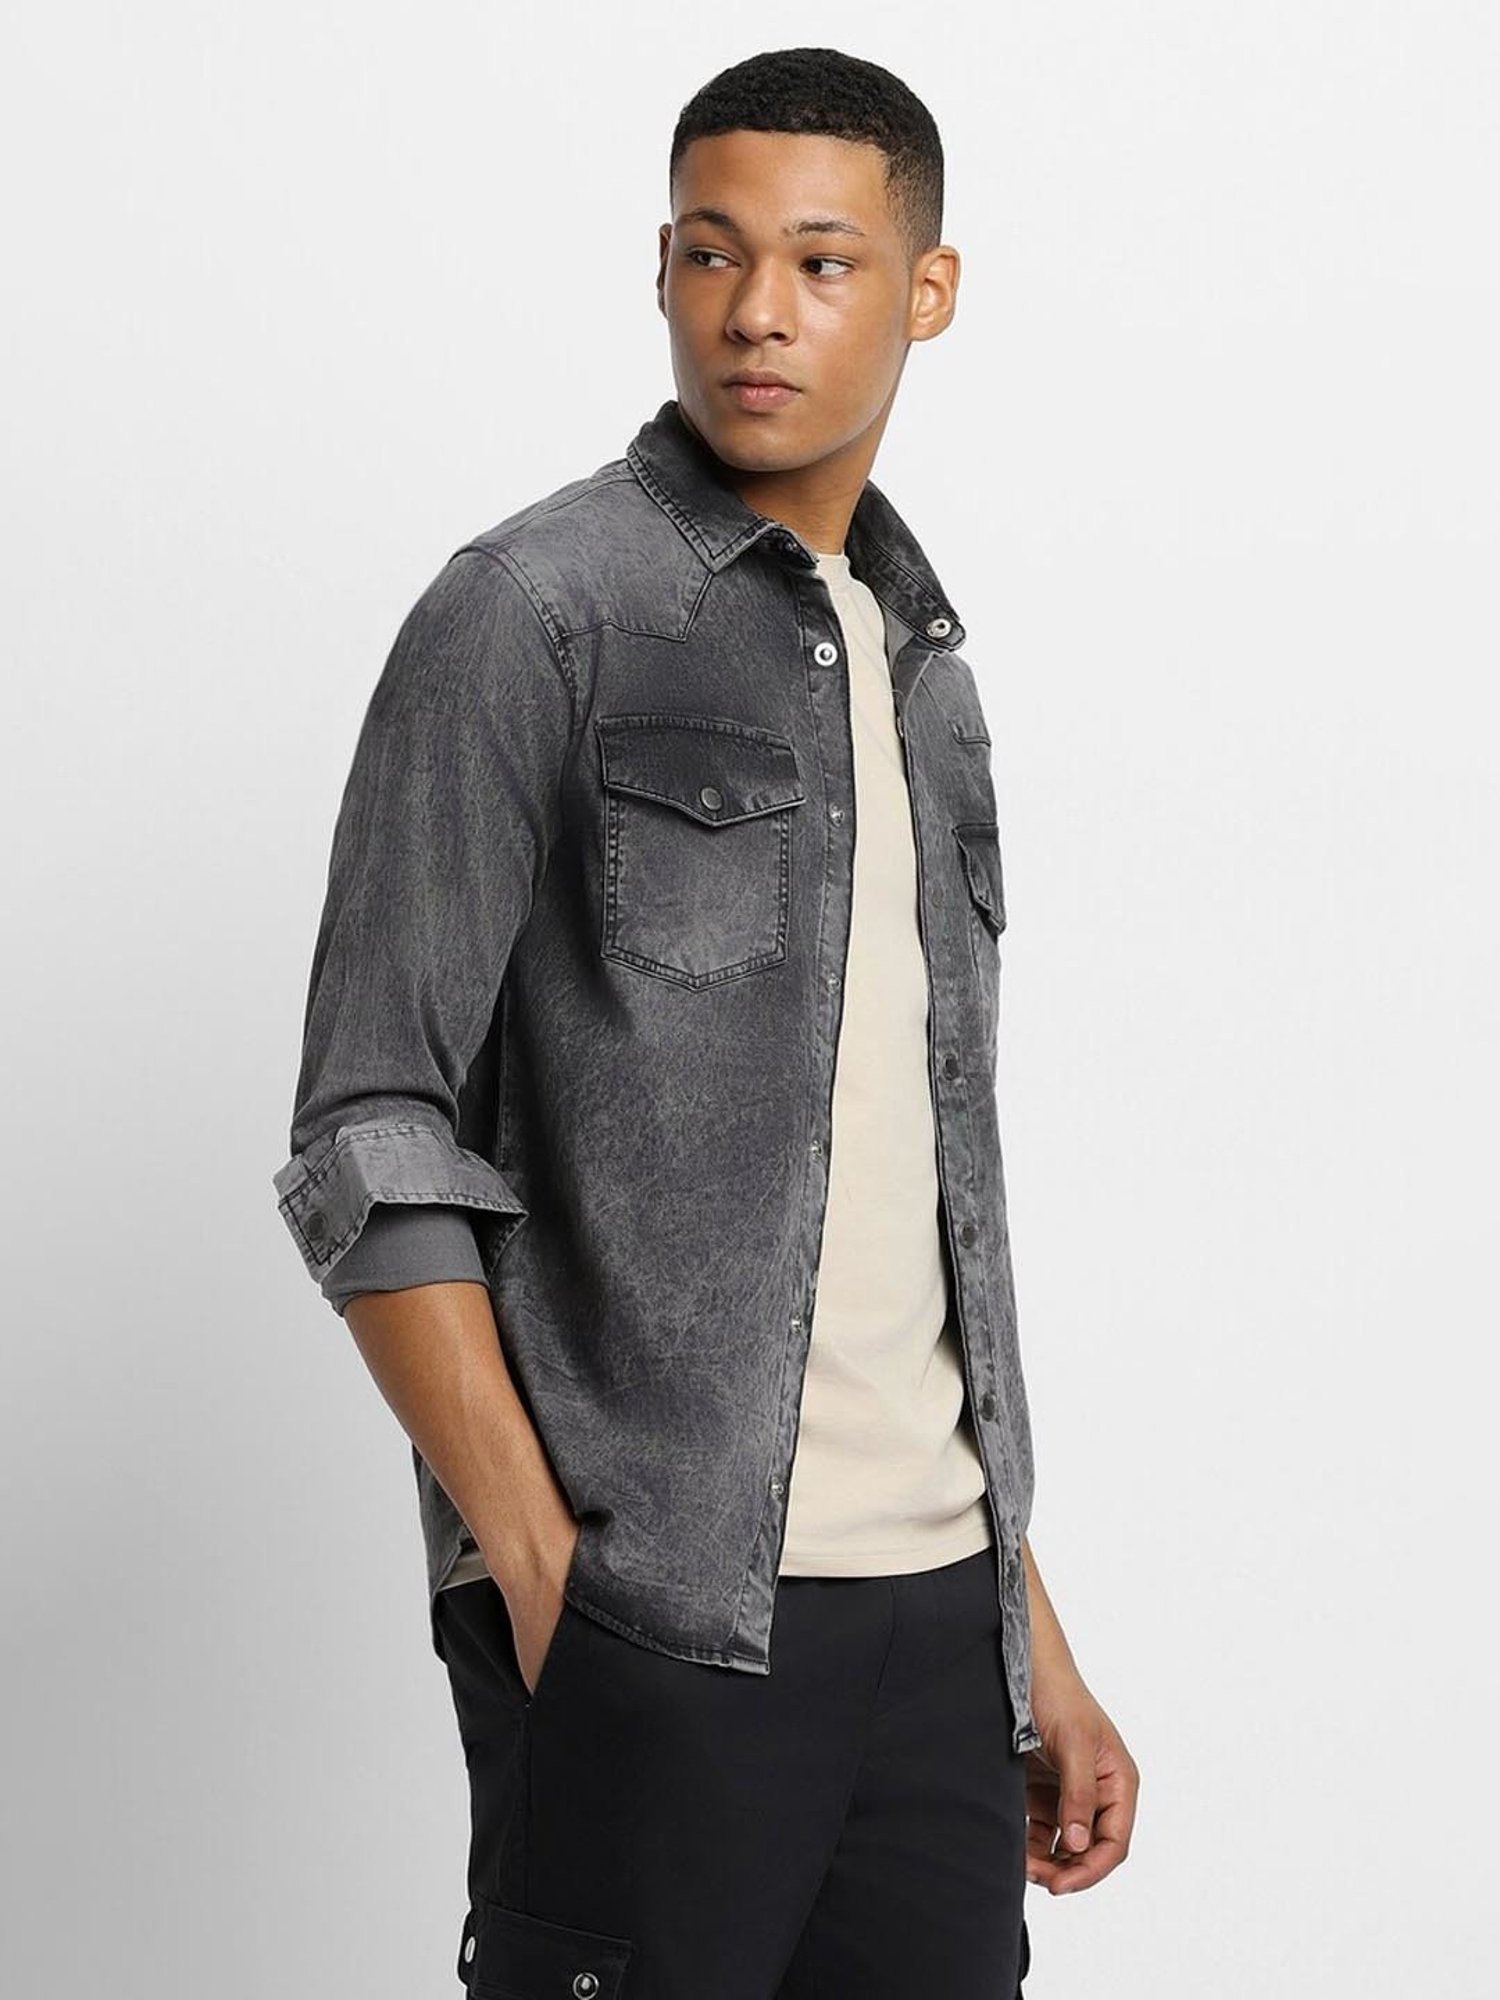 ASOS DESIGN Oversized Denim Shirt With Contrast Sleeves And Collar, $9 |  Asos | Lookastic